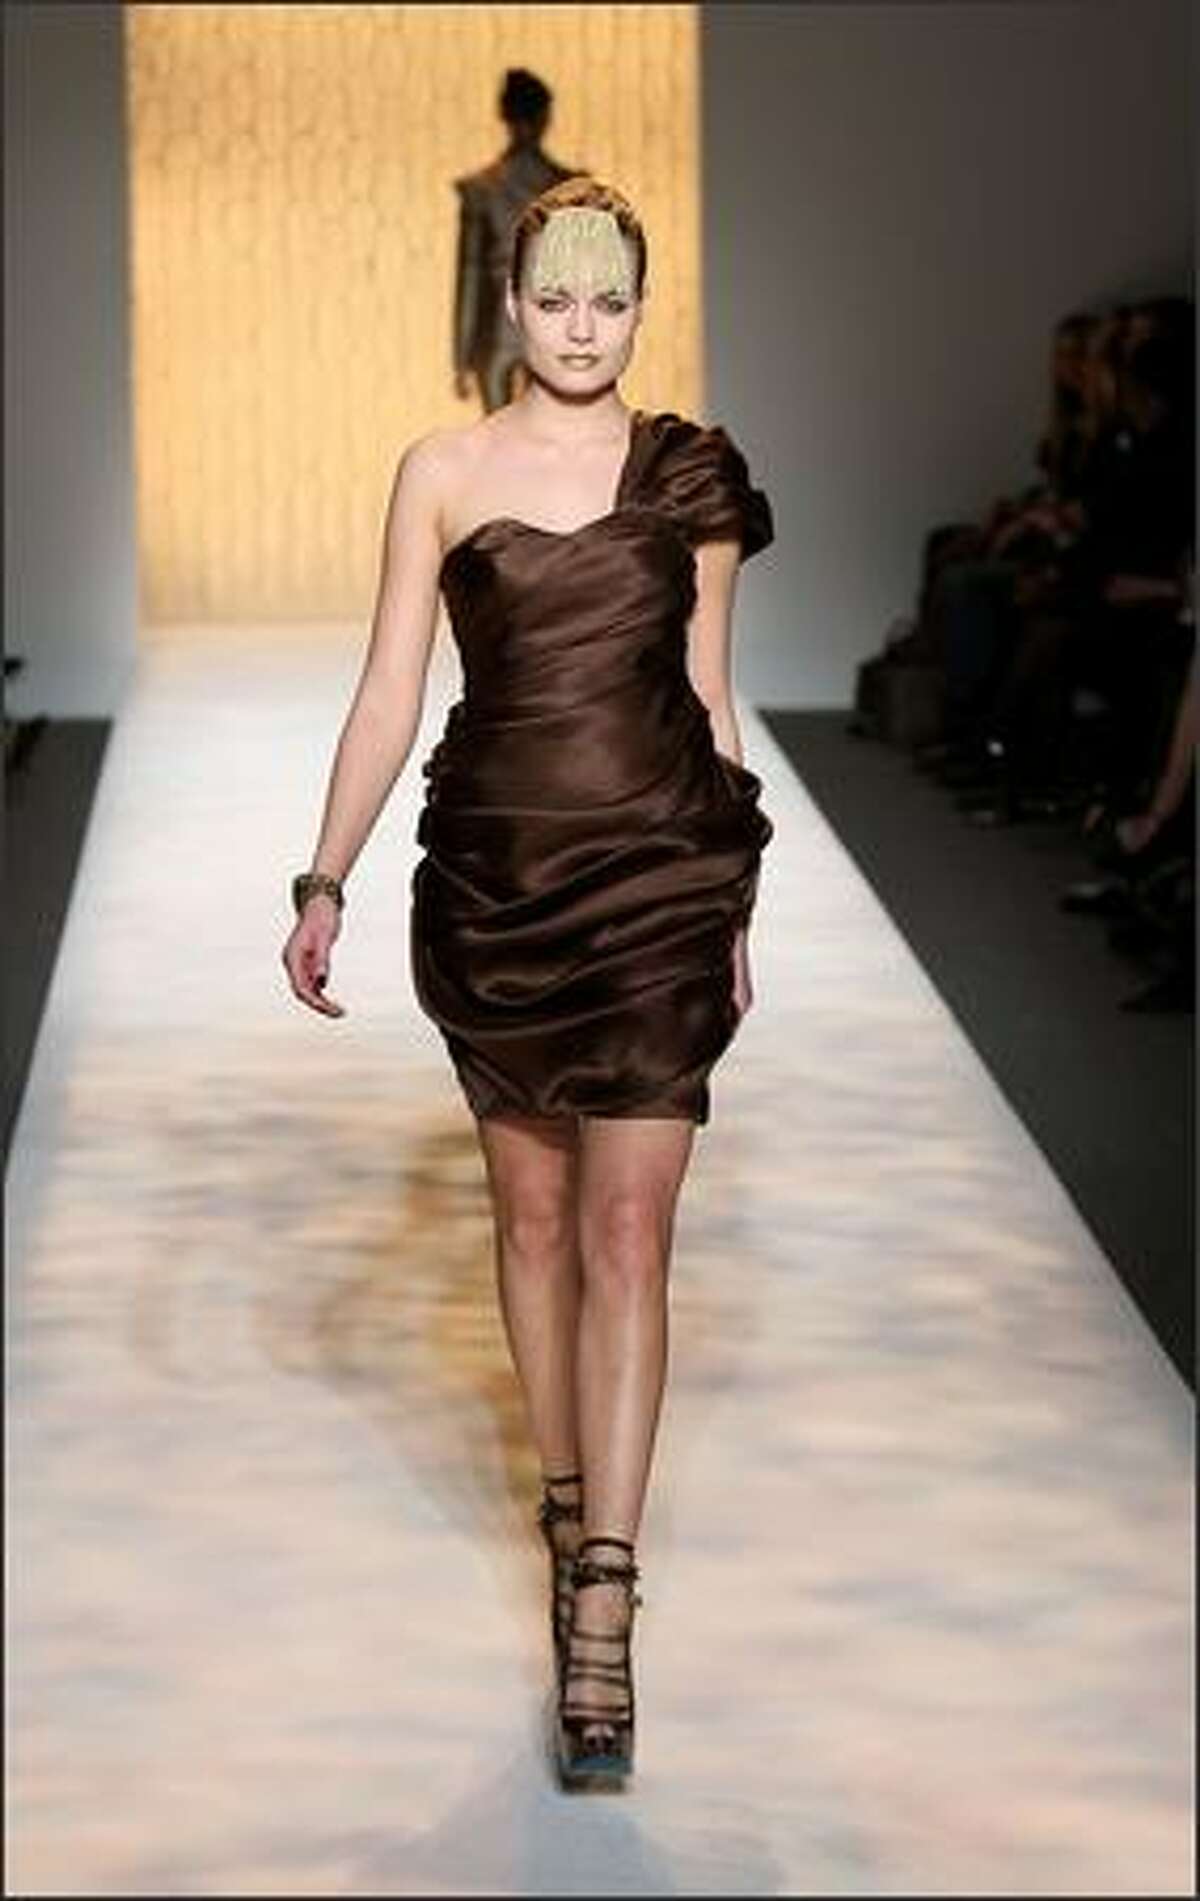 A model walks the runway during the Christian Siriano Fall 2009 fashion show at Mercedes-Benz Fashion Week in New York, Thursday, Feb. 19, 2009.